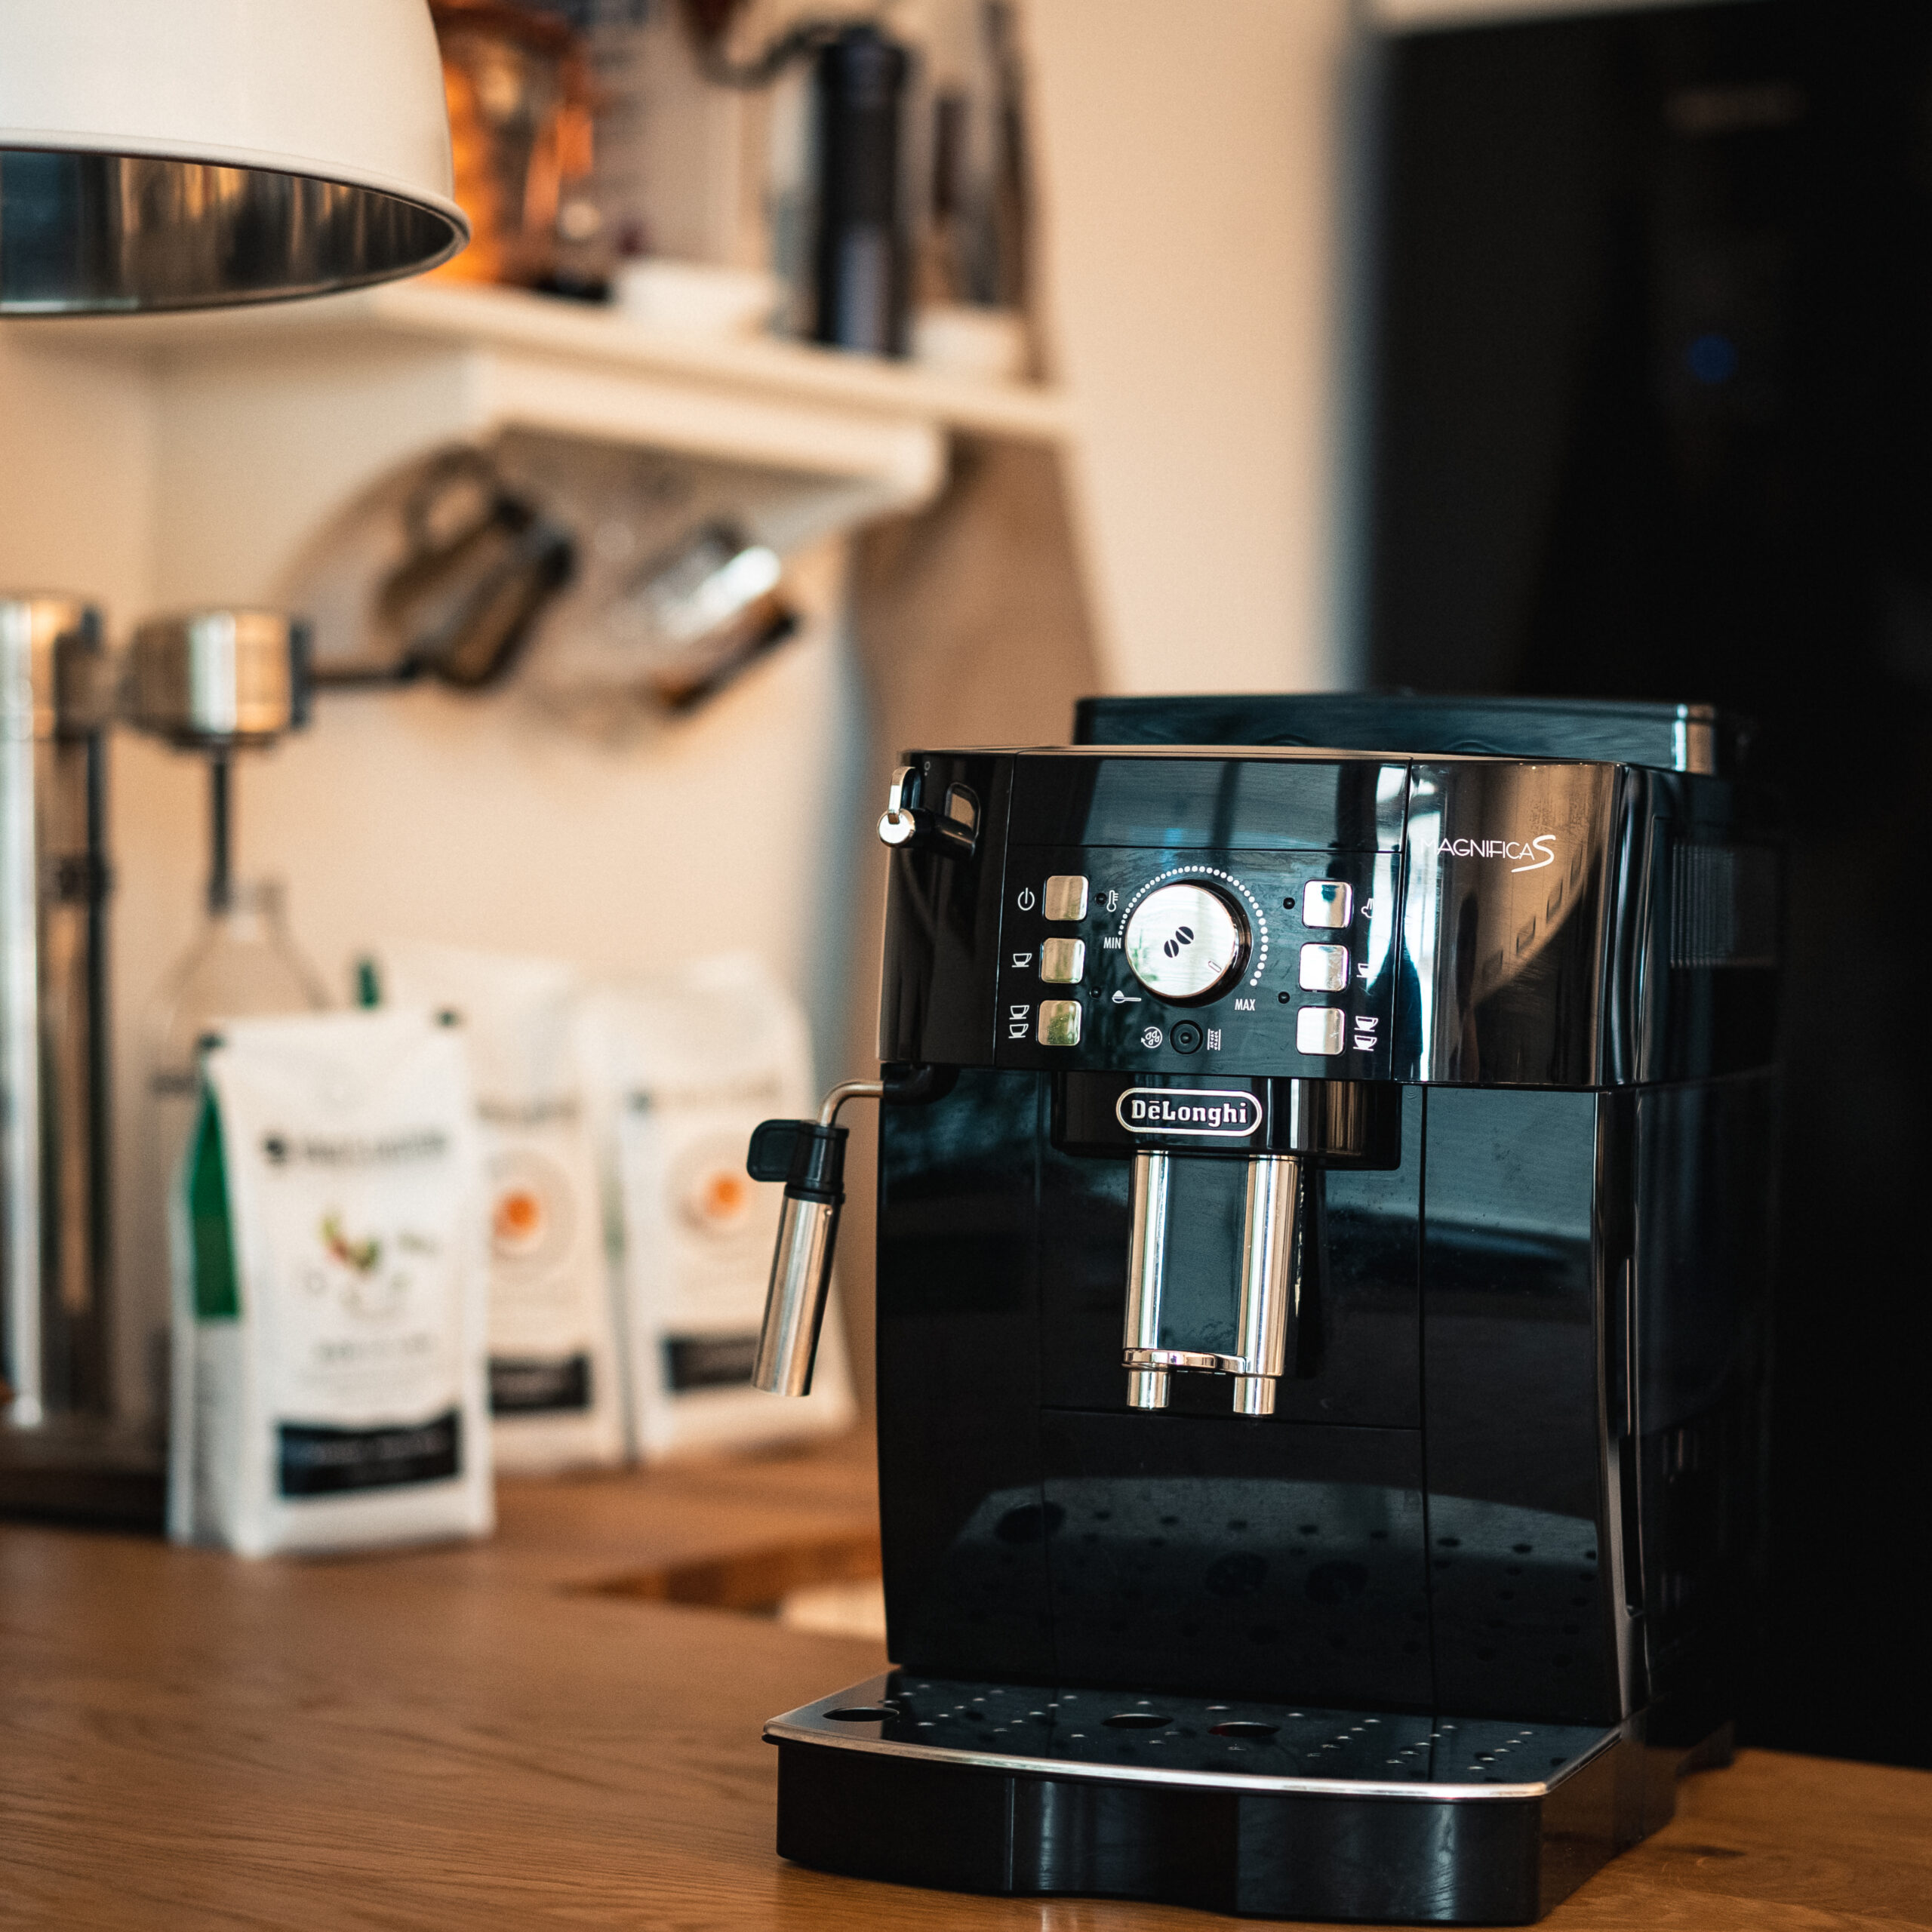 How to - Maintain a Delonghi Magnifica S 